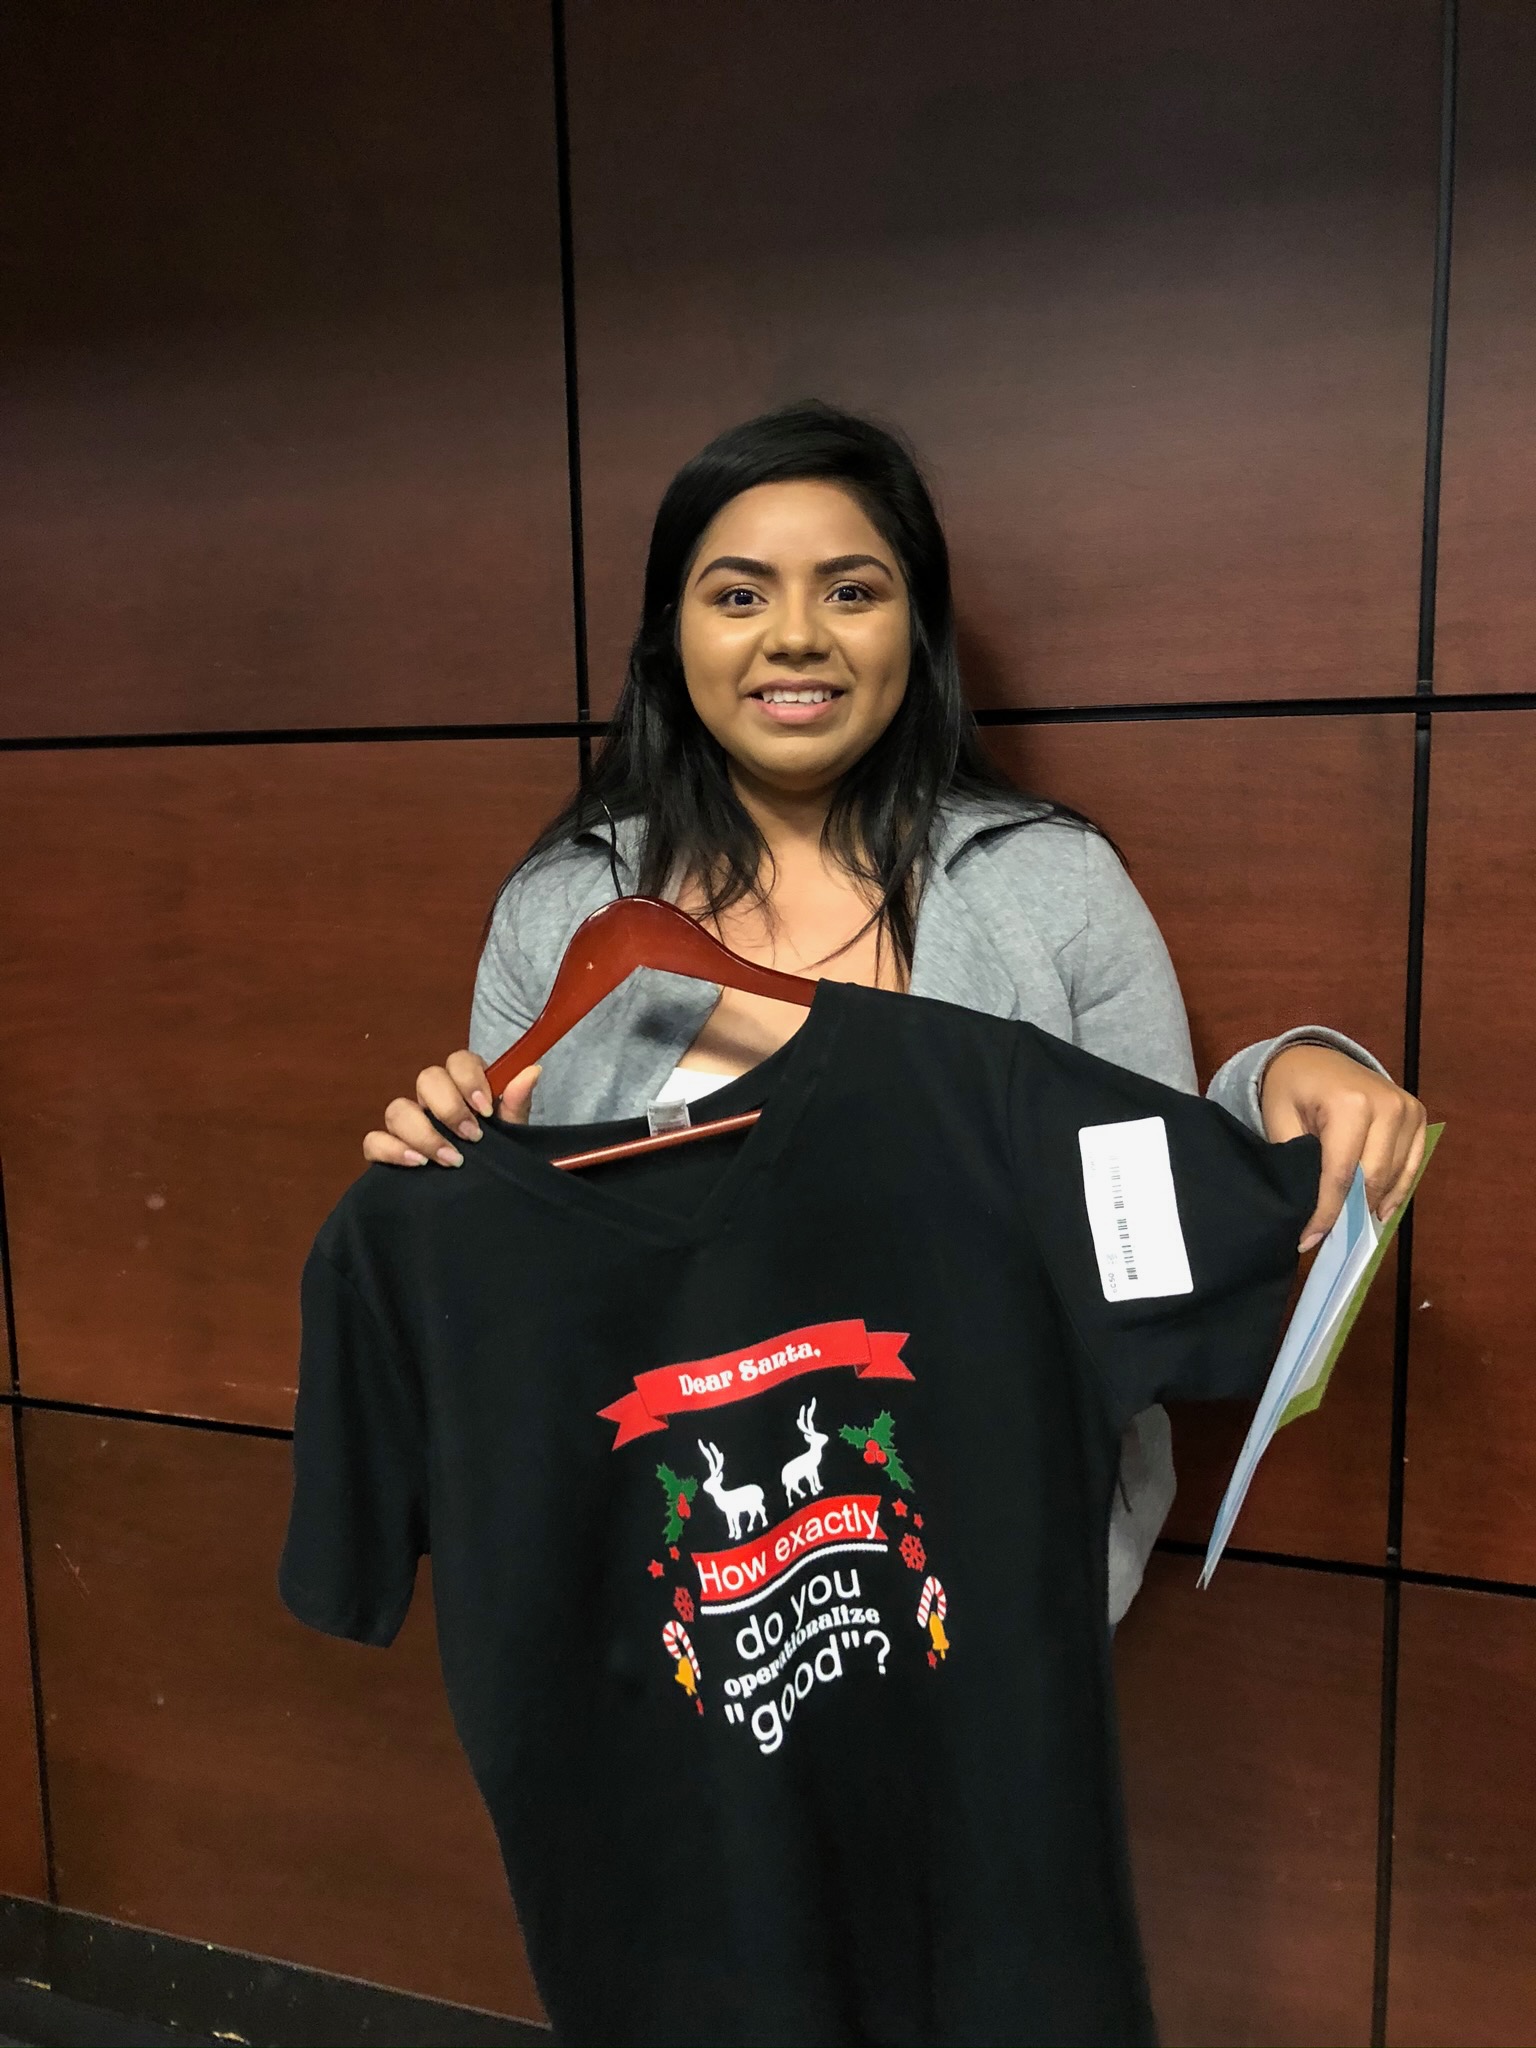 A student holding a black t-shirt that they won in a raffle.